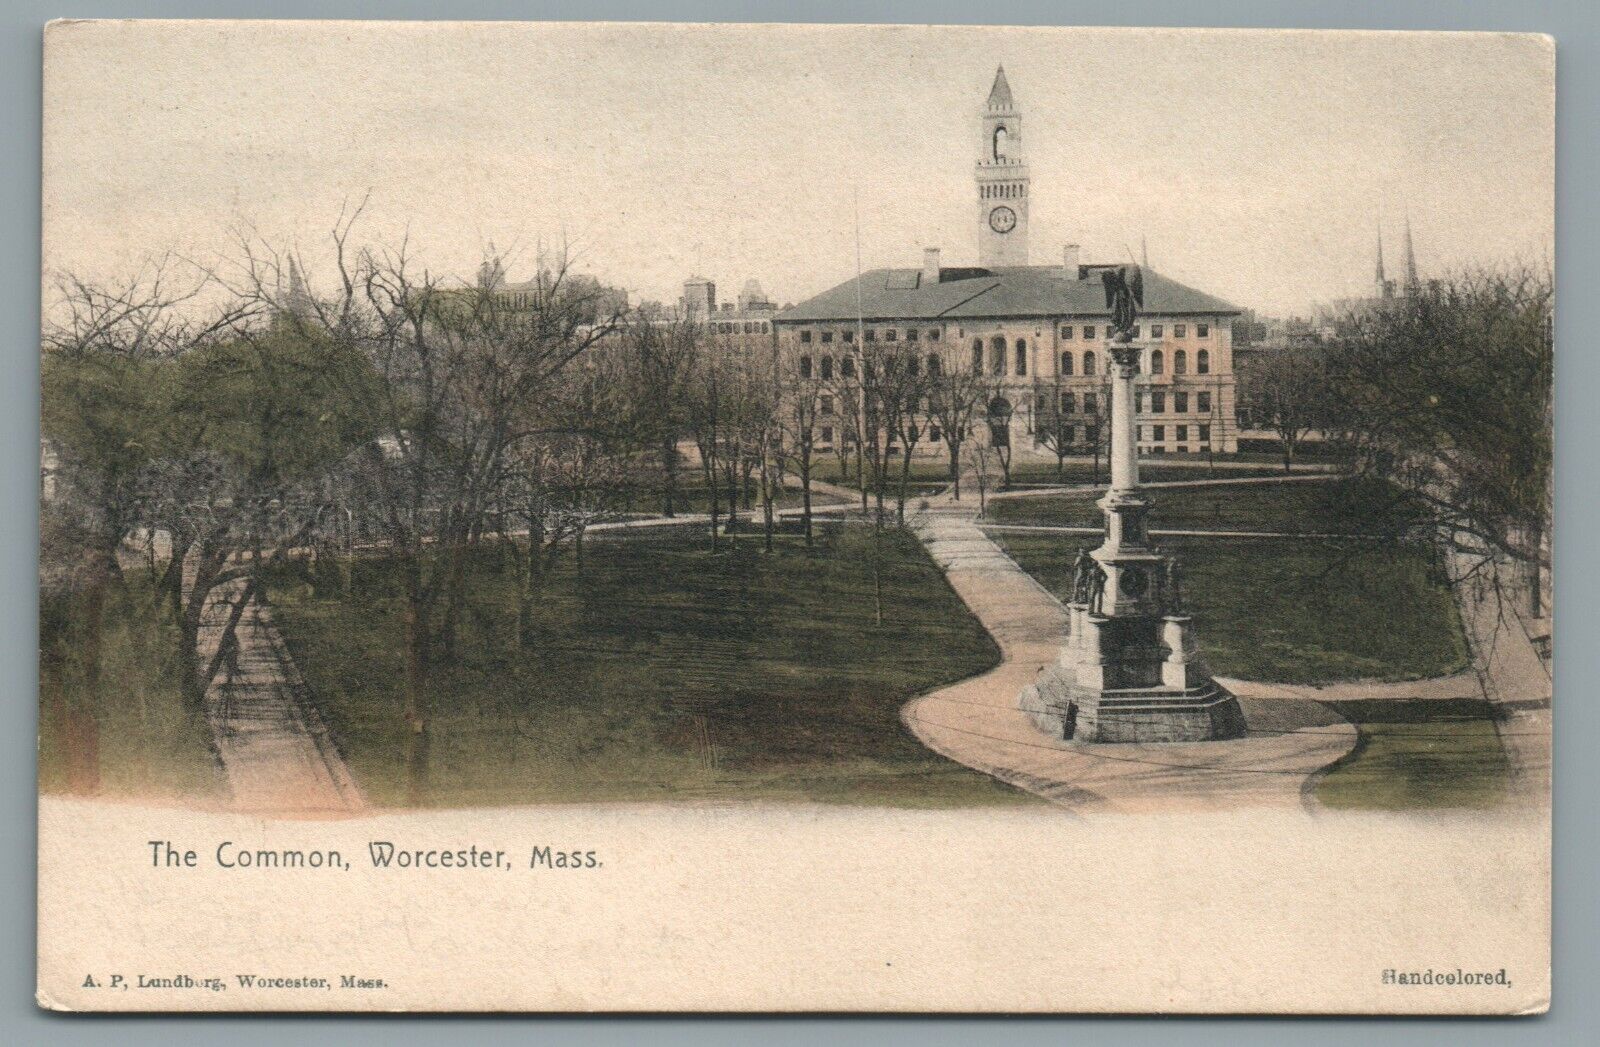 The Common Worcester Mass City Hall Hand Colored Vintage Postcard c1906